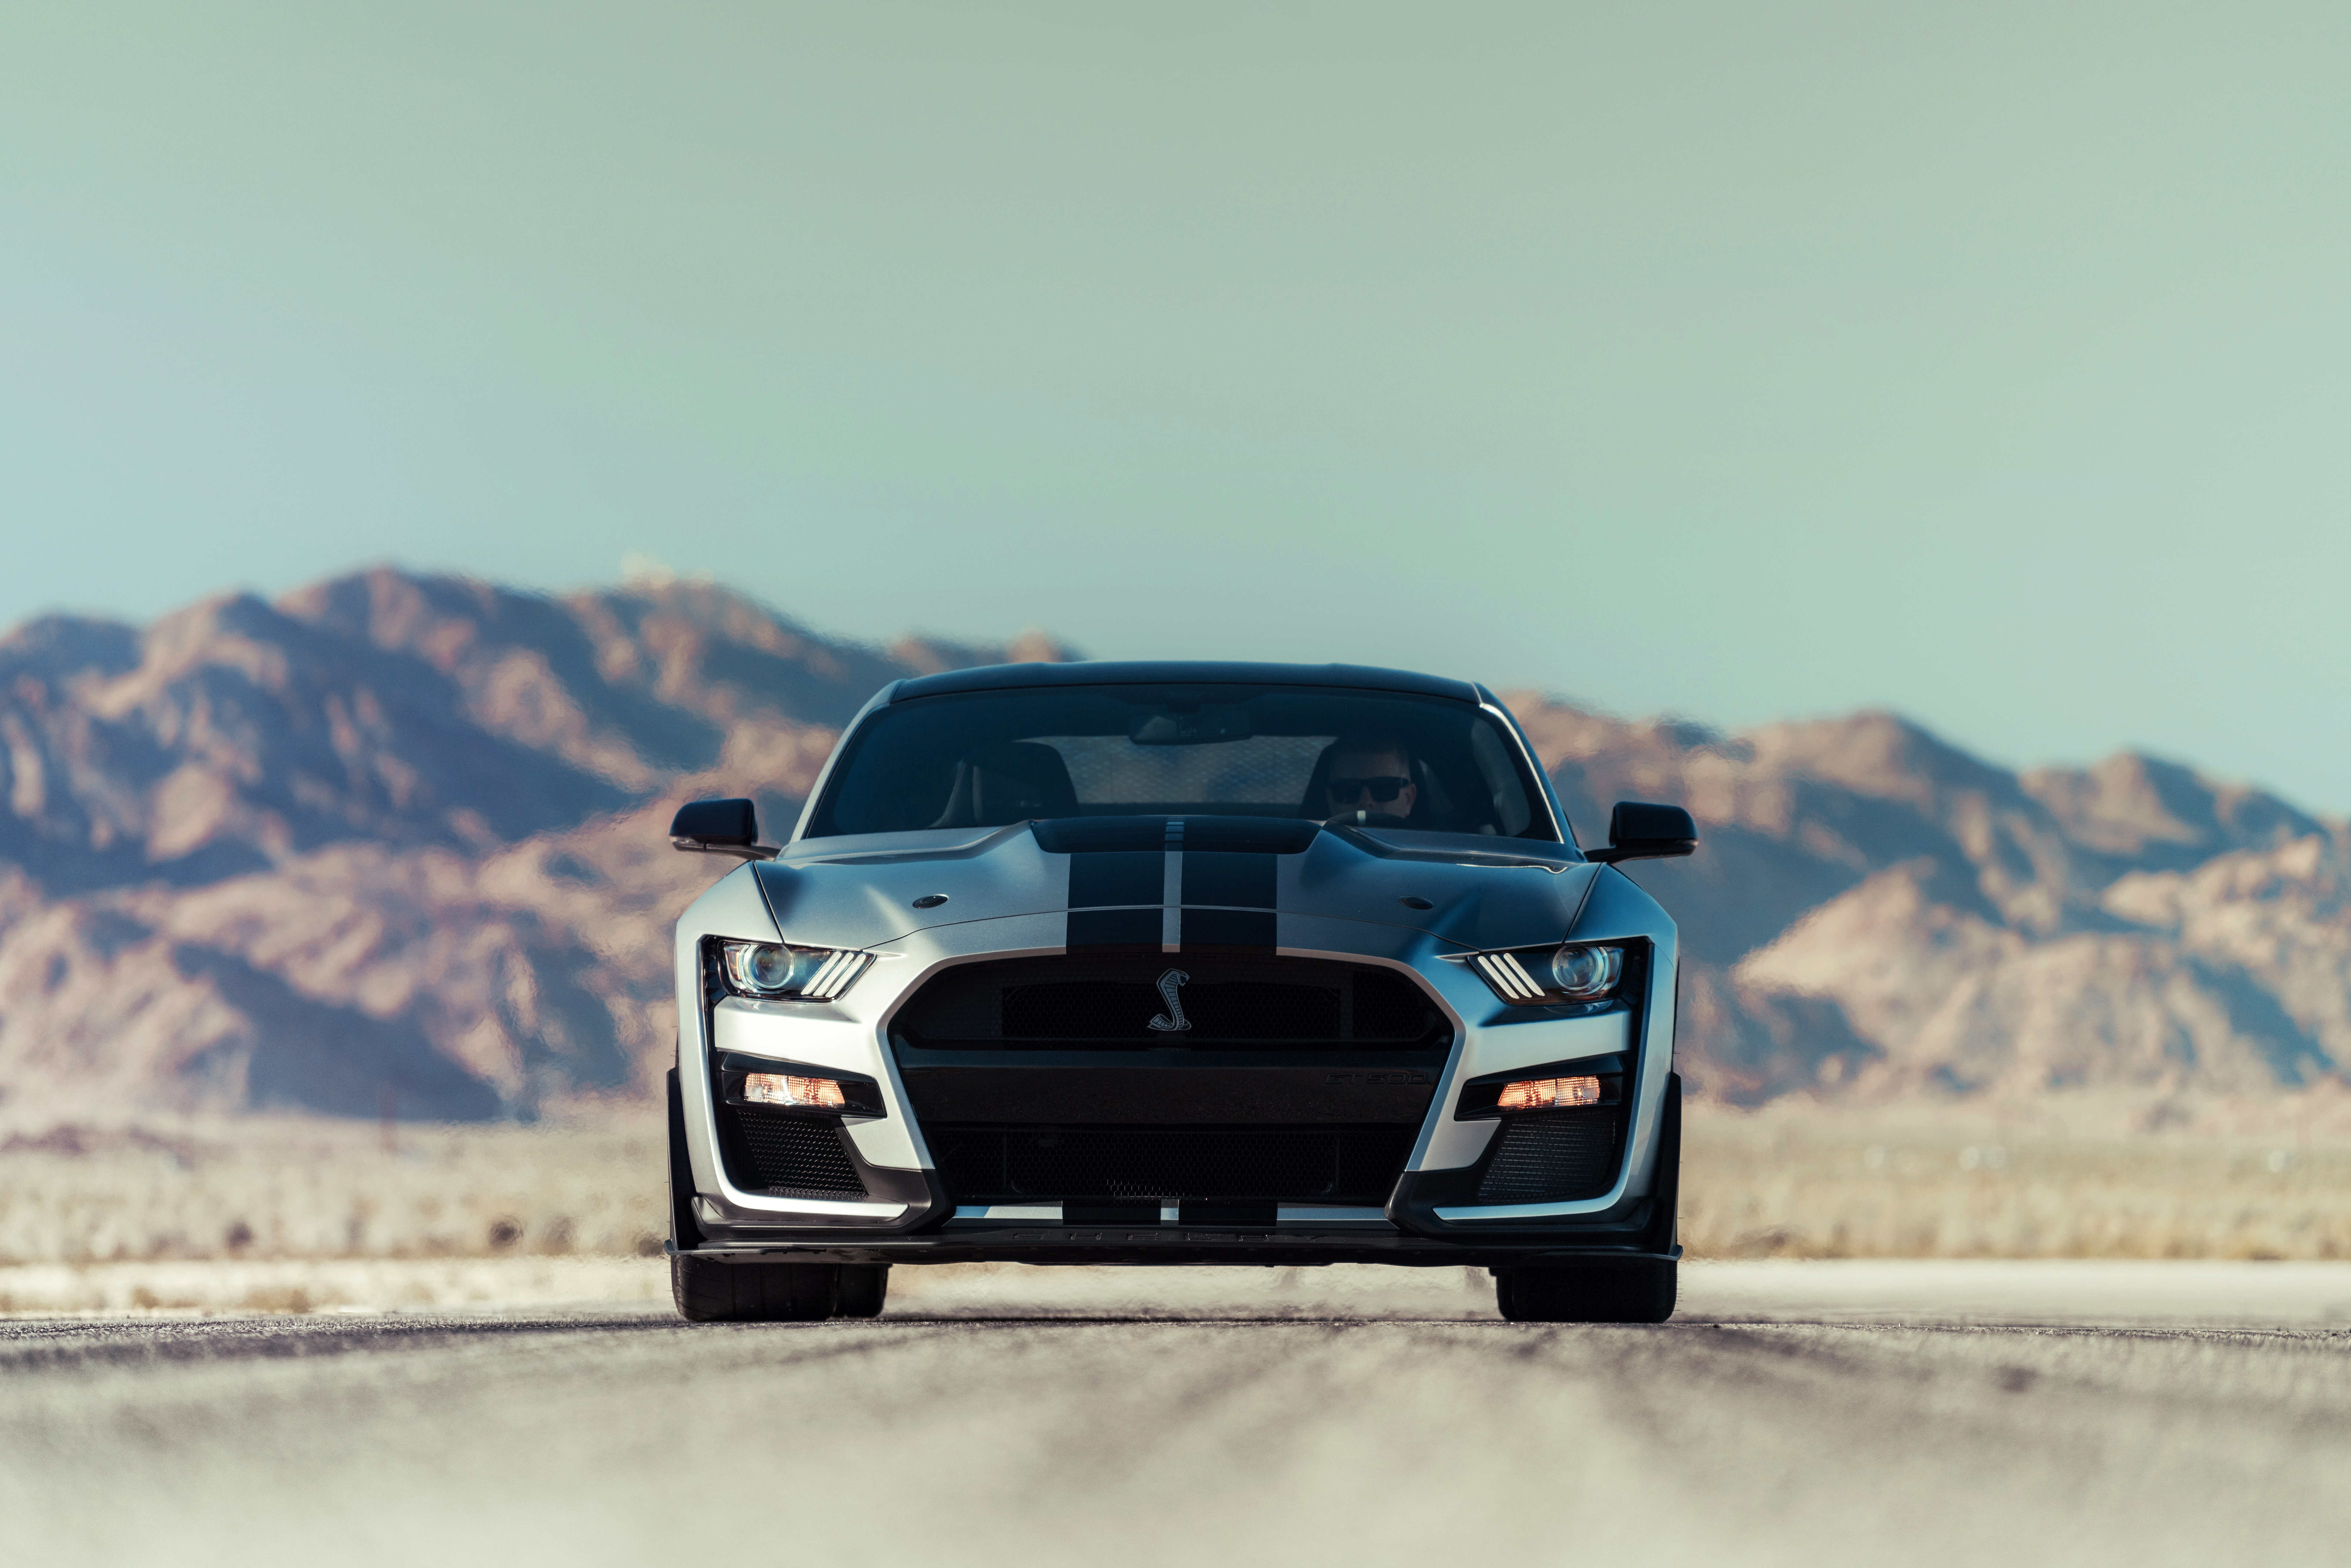 ford mustang shelby gt500, ford mustang shelby, vehicles, car, ford mustang, ford, muscle car, silver car